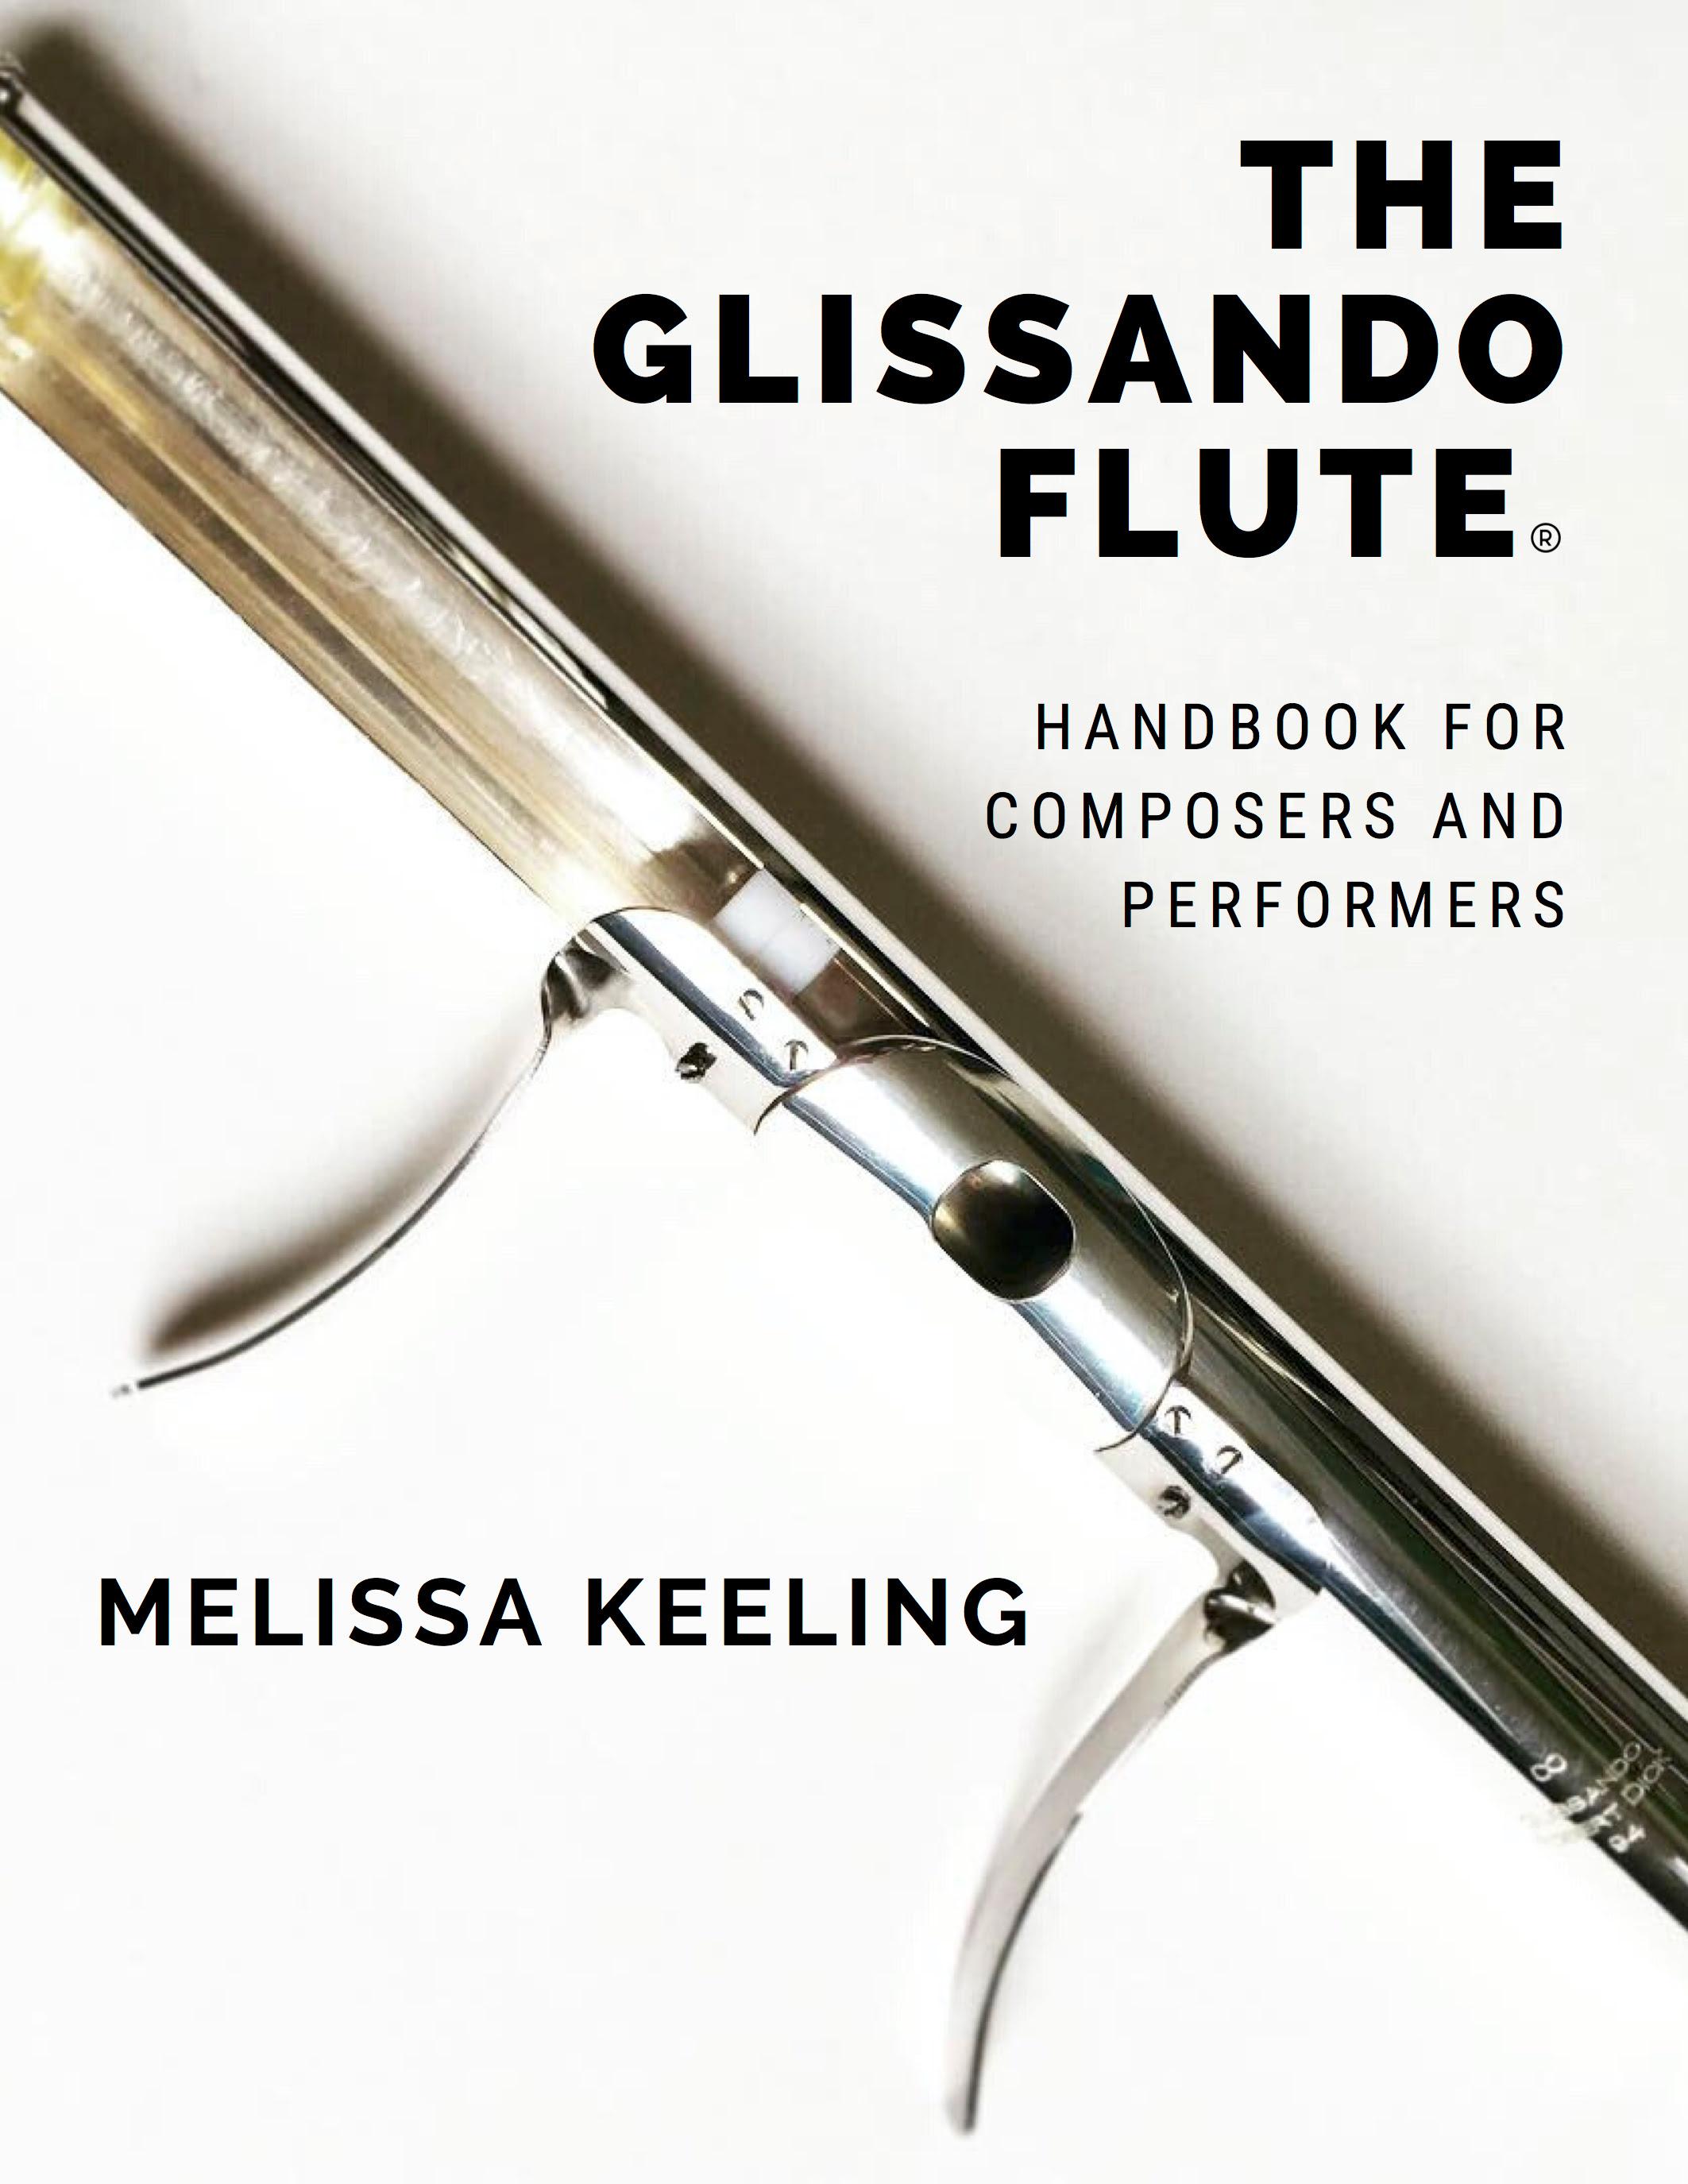 The Glissando Flute: Handbook for Composers and Performers - MELISSA KEELING | Suono Flauti